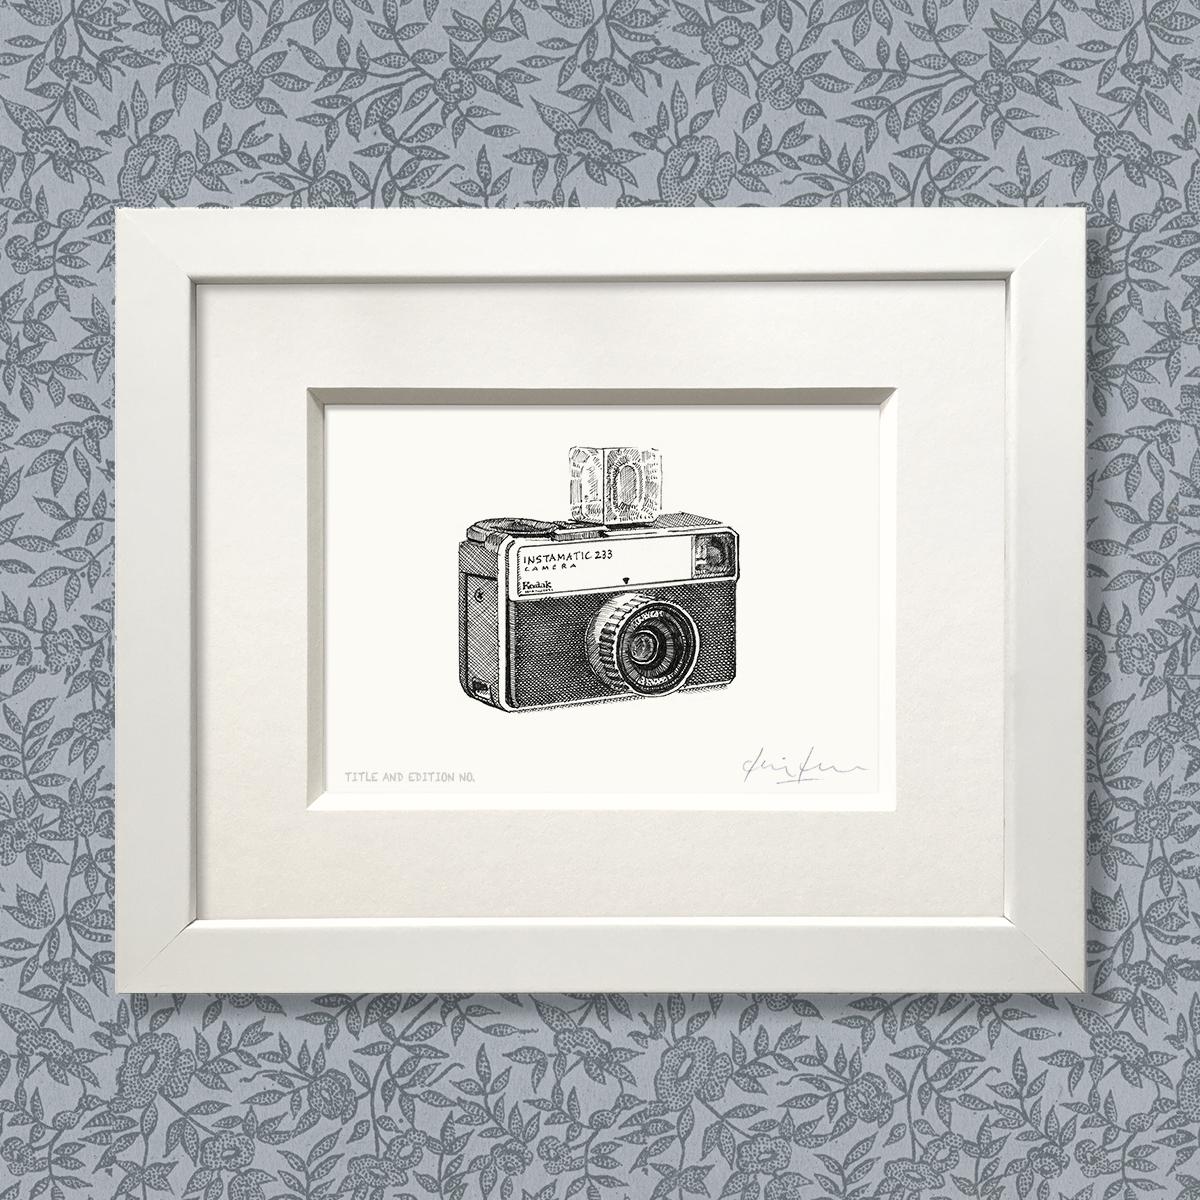 Limited edition print from pen and ink drawing of an old Instamatic camera in a white frame